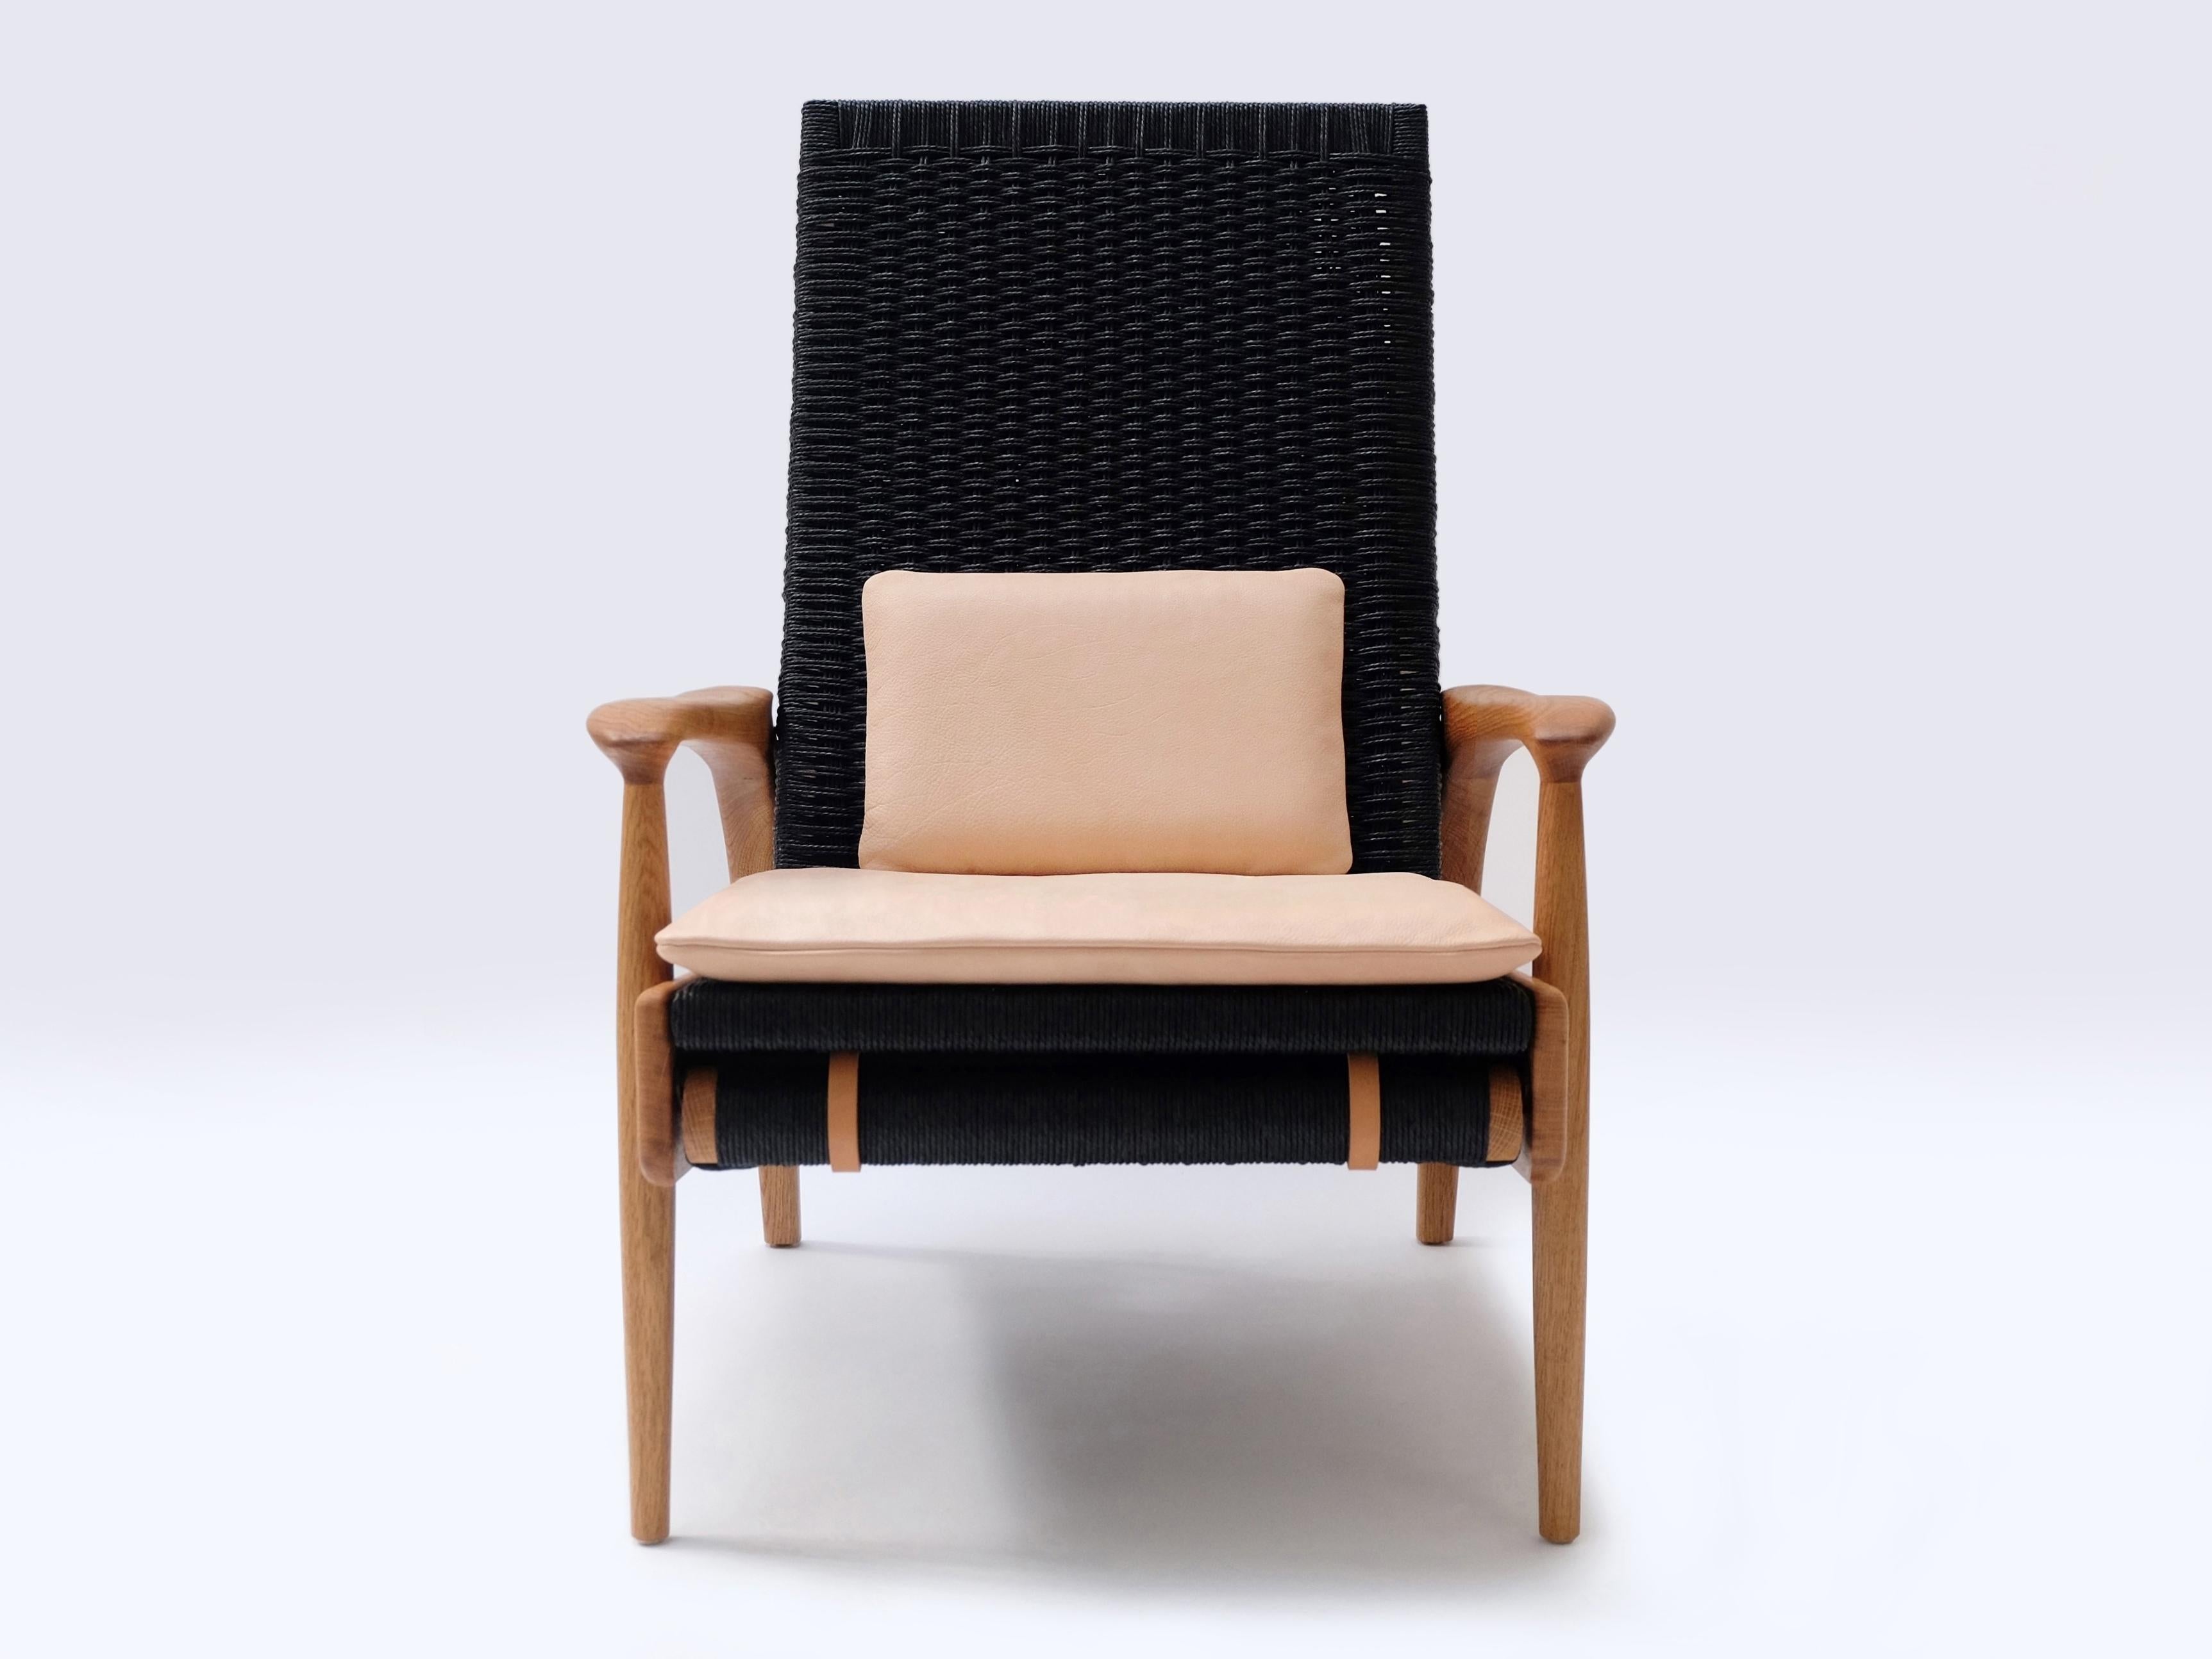 Custom-Made Handcrafted Reclining Eco Lounge Chairs FENDRIK by Studio180degree
Shown in Sustainable Solid Natural Oiled Oak and Contrasting Original Black Danish Cord

Noble - Tactile – Refined - Sustainable
Reclining Eco Lounge Chair FENDRIK is a